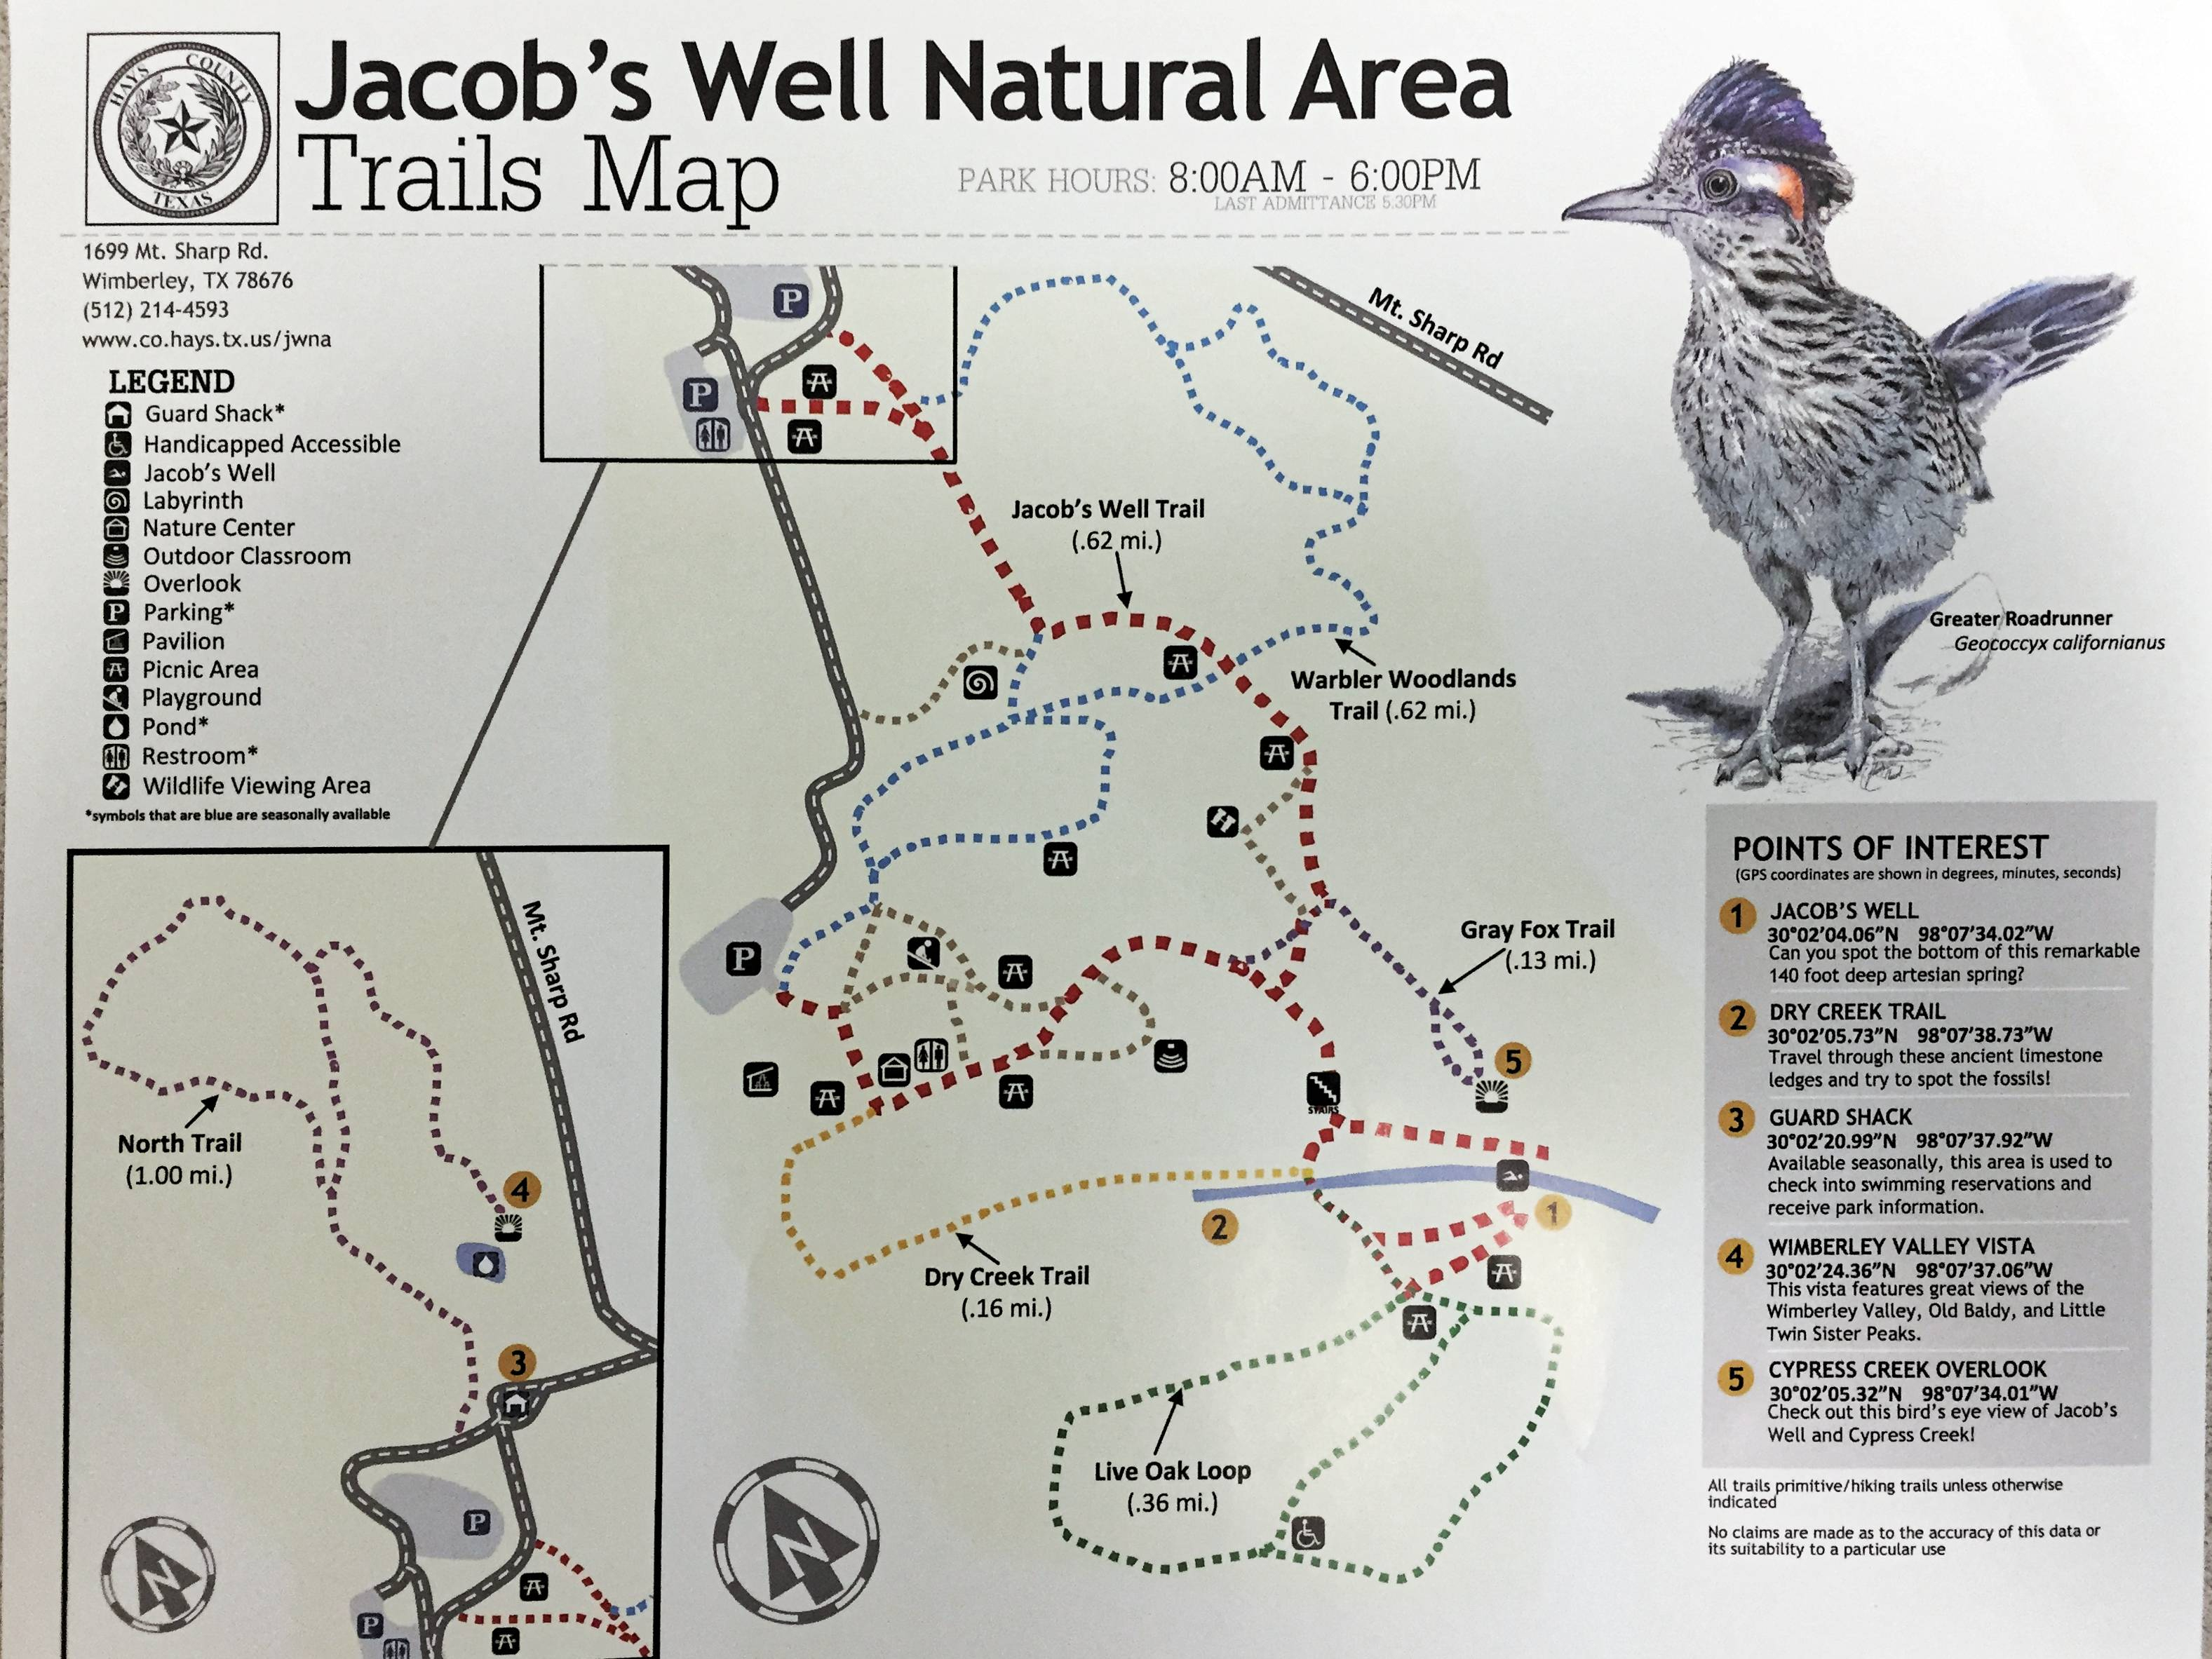 Jacobs Well Natural Area In Wimberley, Texas - A Visitwimberley - Texas Hiking Trails Map